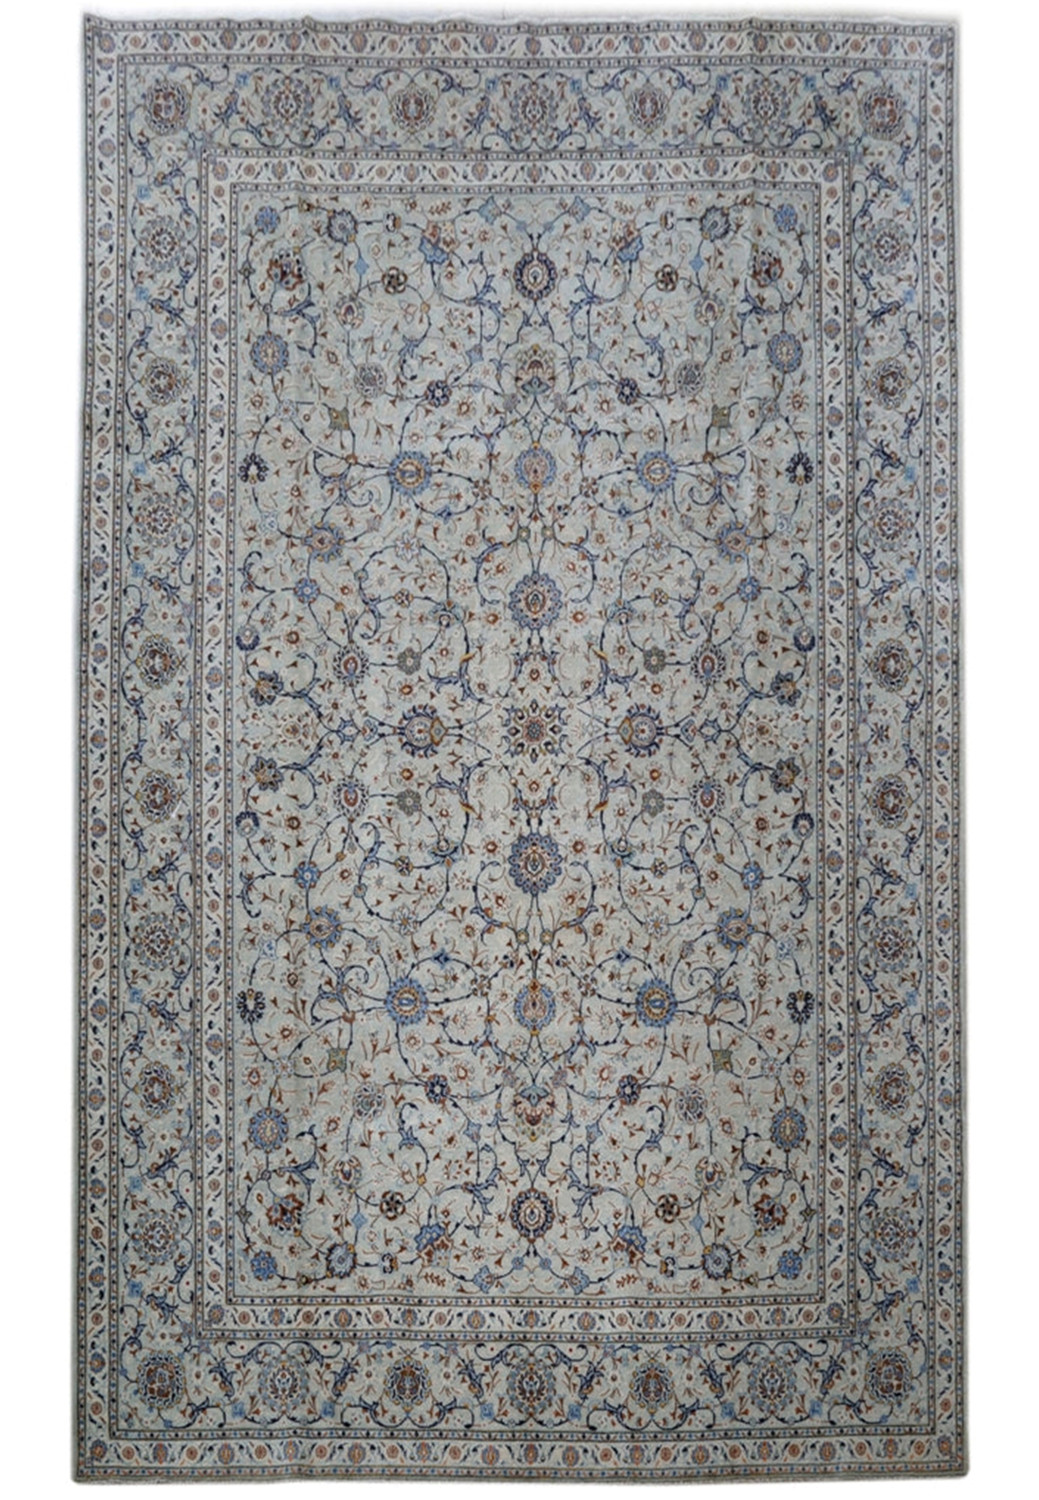 Detailed view of a 11 x 18 Persian Kashan All Over Design Rug, showcasing its intricate patterns and color harmony.